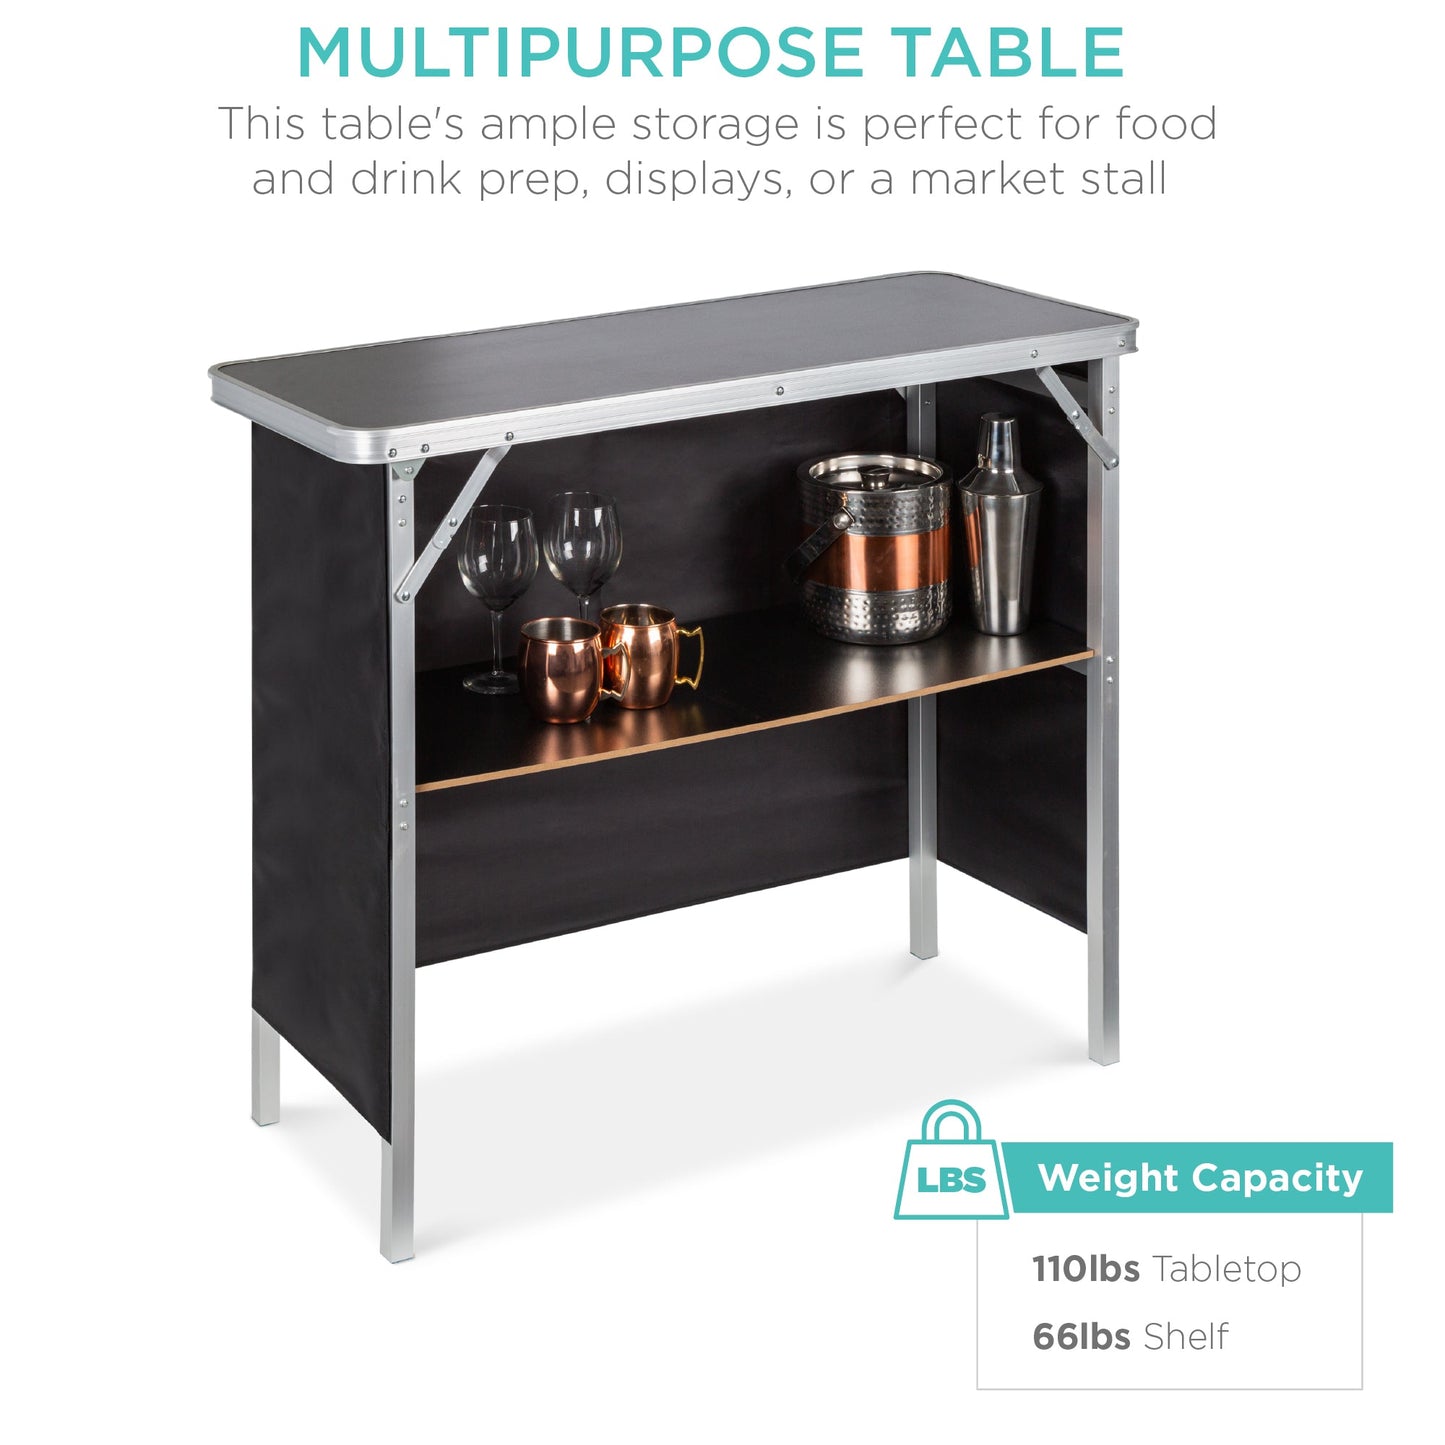 Portable Pop-Up Bar Table w/ Carrying Case, Removable Skirt